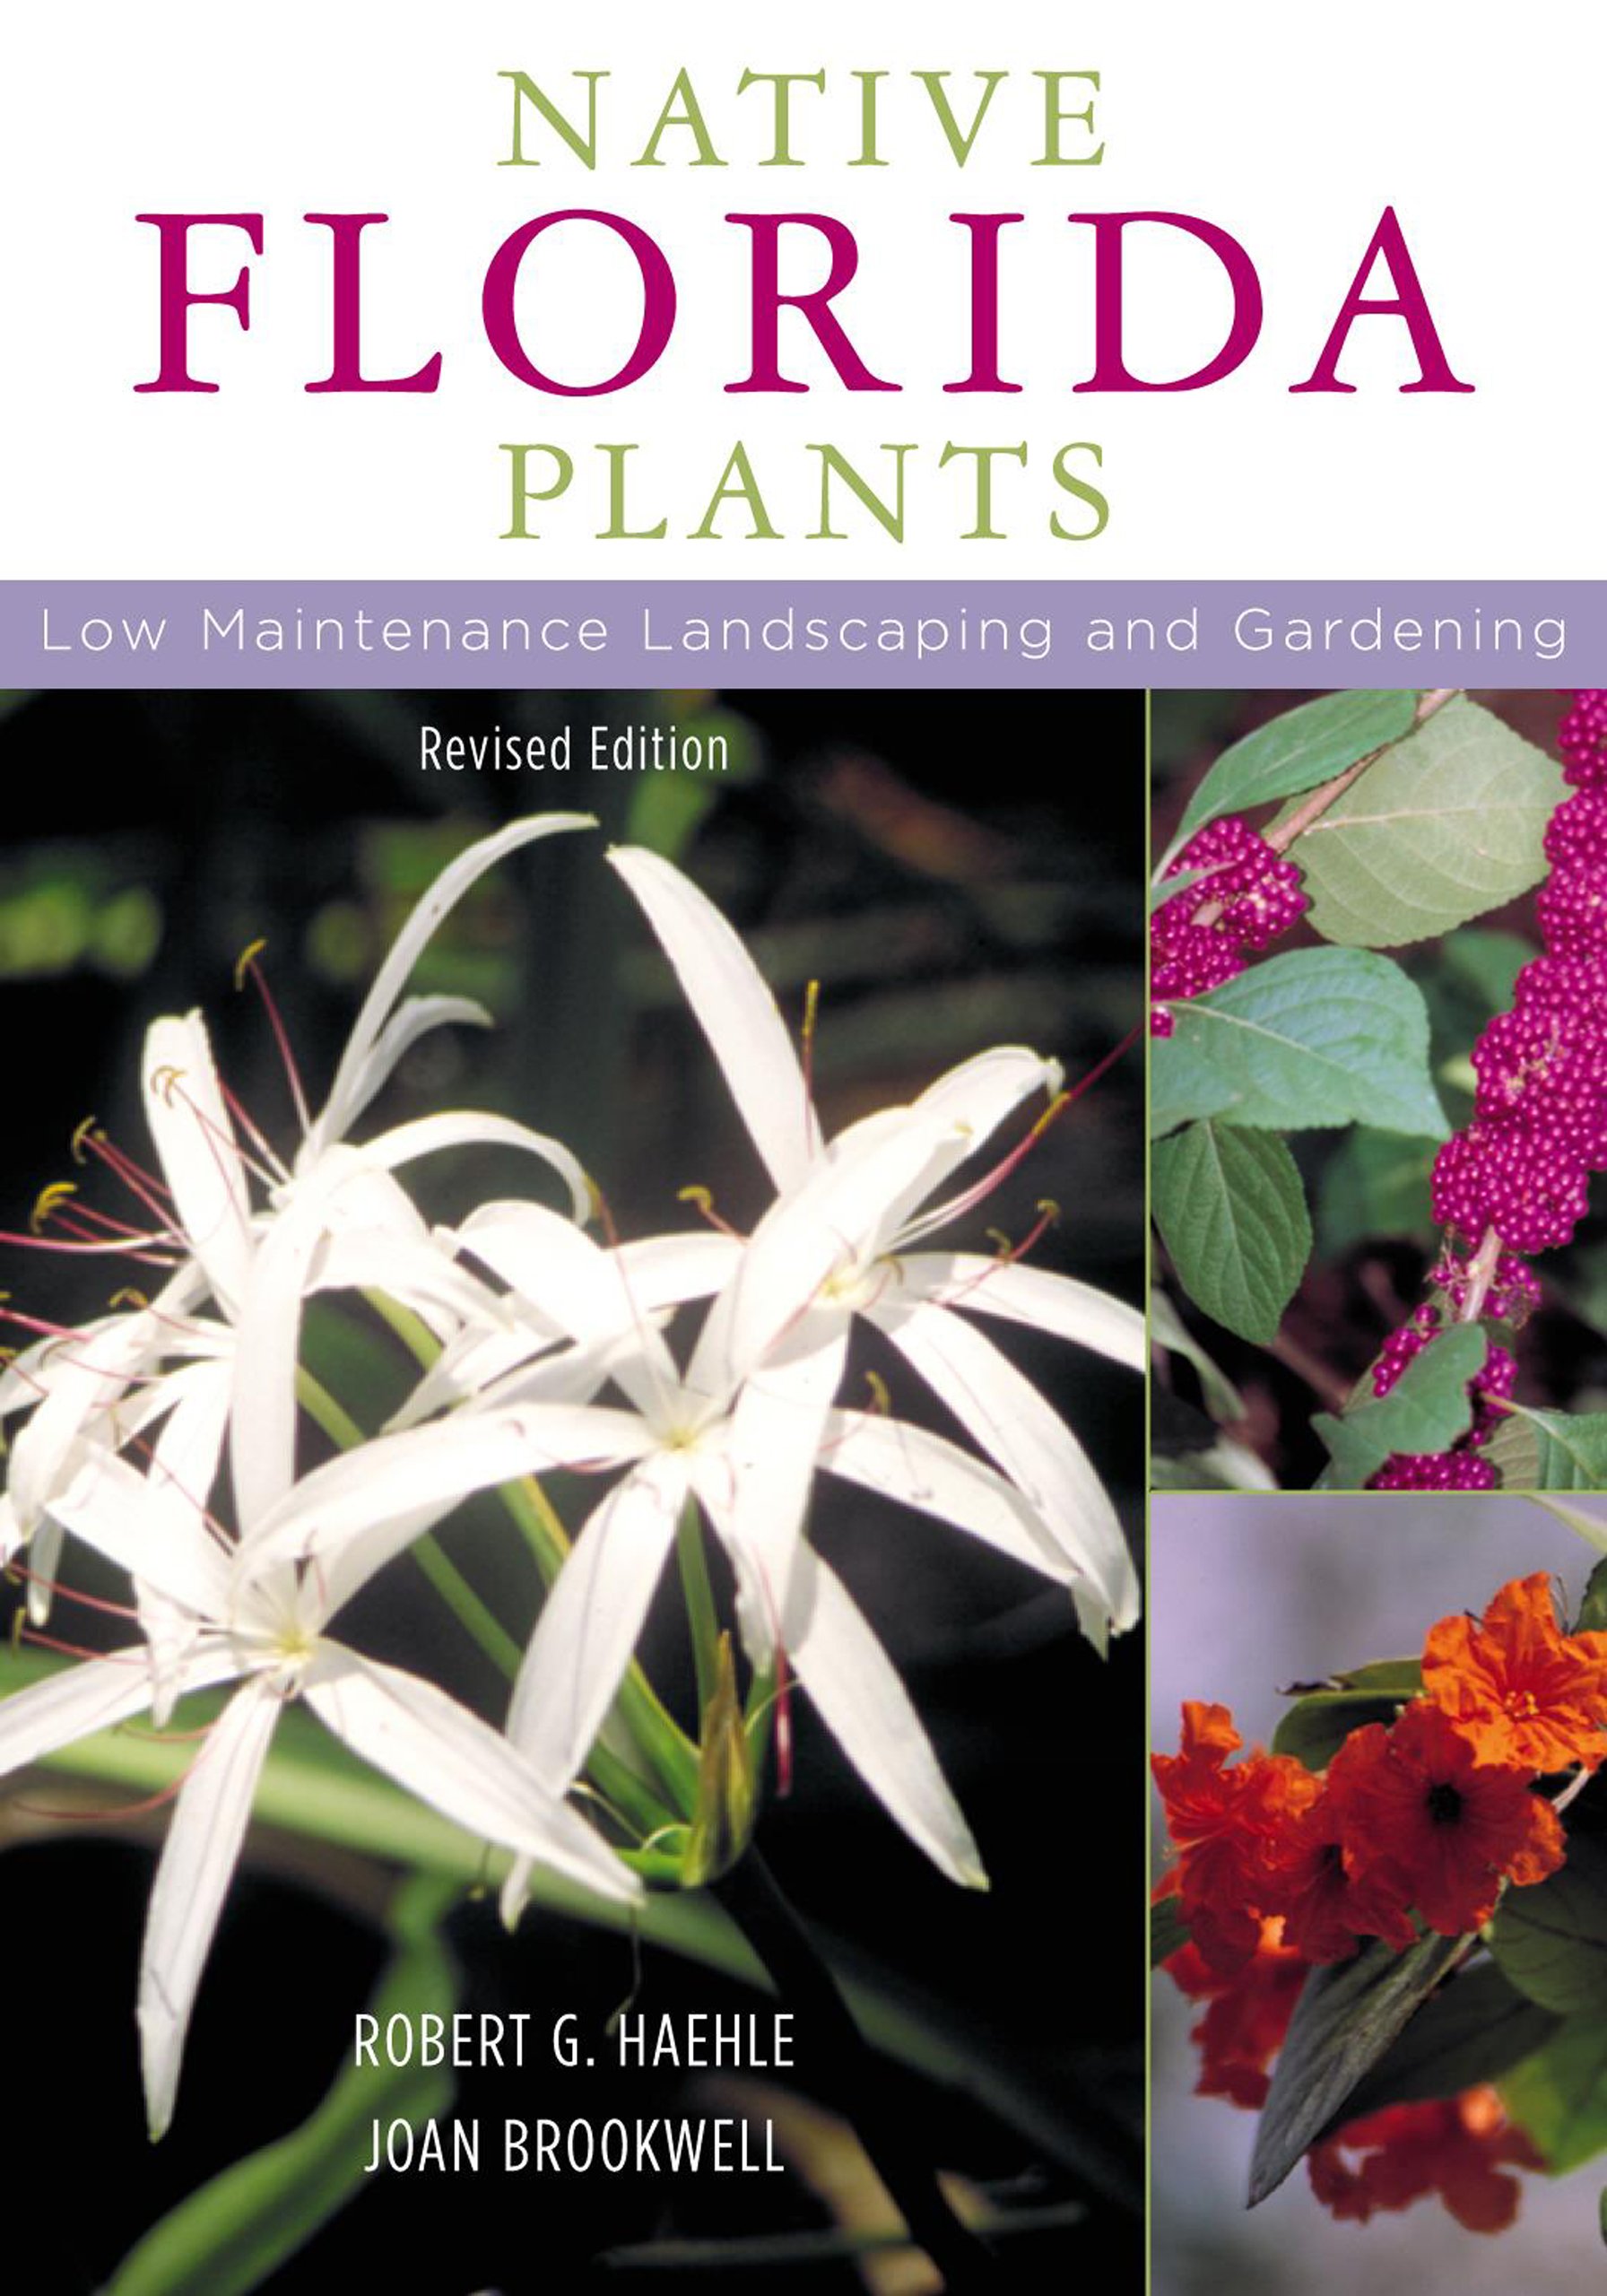 Native Florida Plants: Low Maintenance Landscaping and Gardening ...